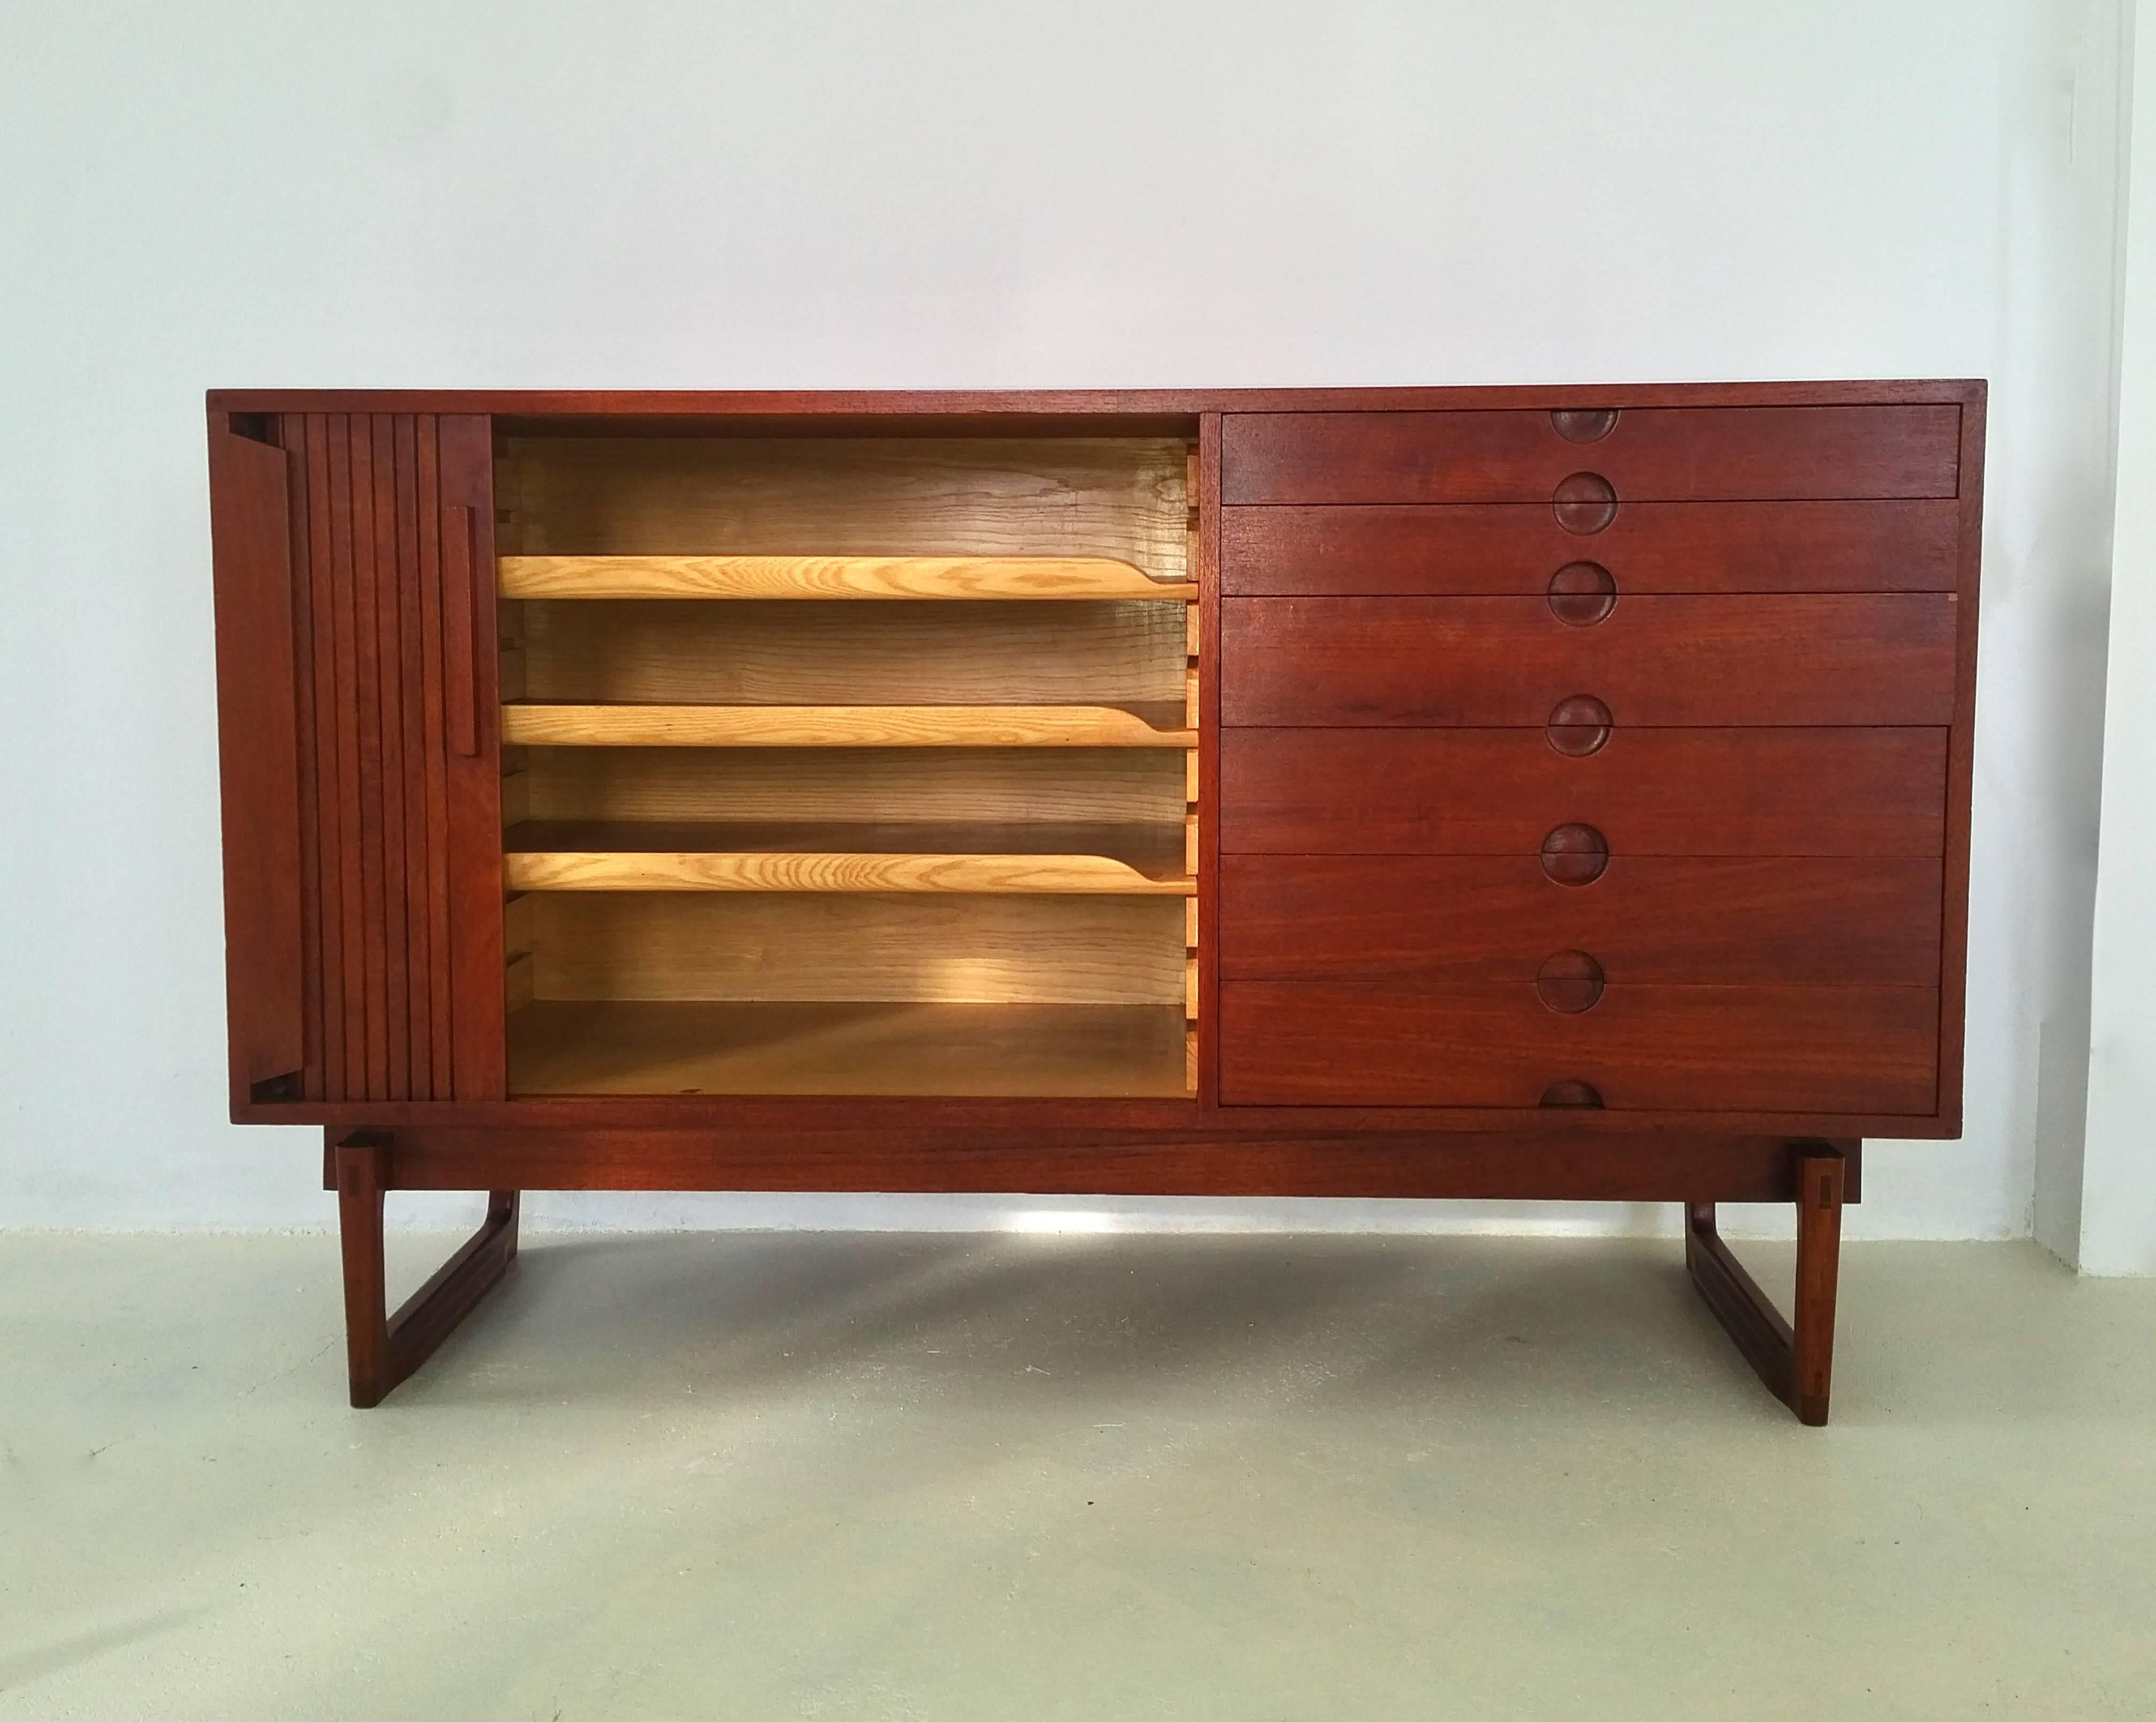 A high quality made credenza with six drawers and a tambour sliding door which hides three ashwood trays that can be taken out and put on different heights inside. Beautiful details such as the joints, the bicolored feet and the curved edges on the